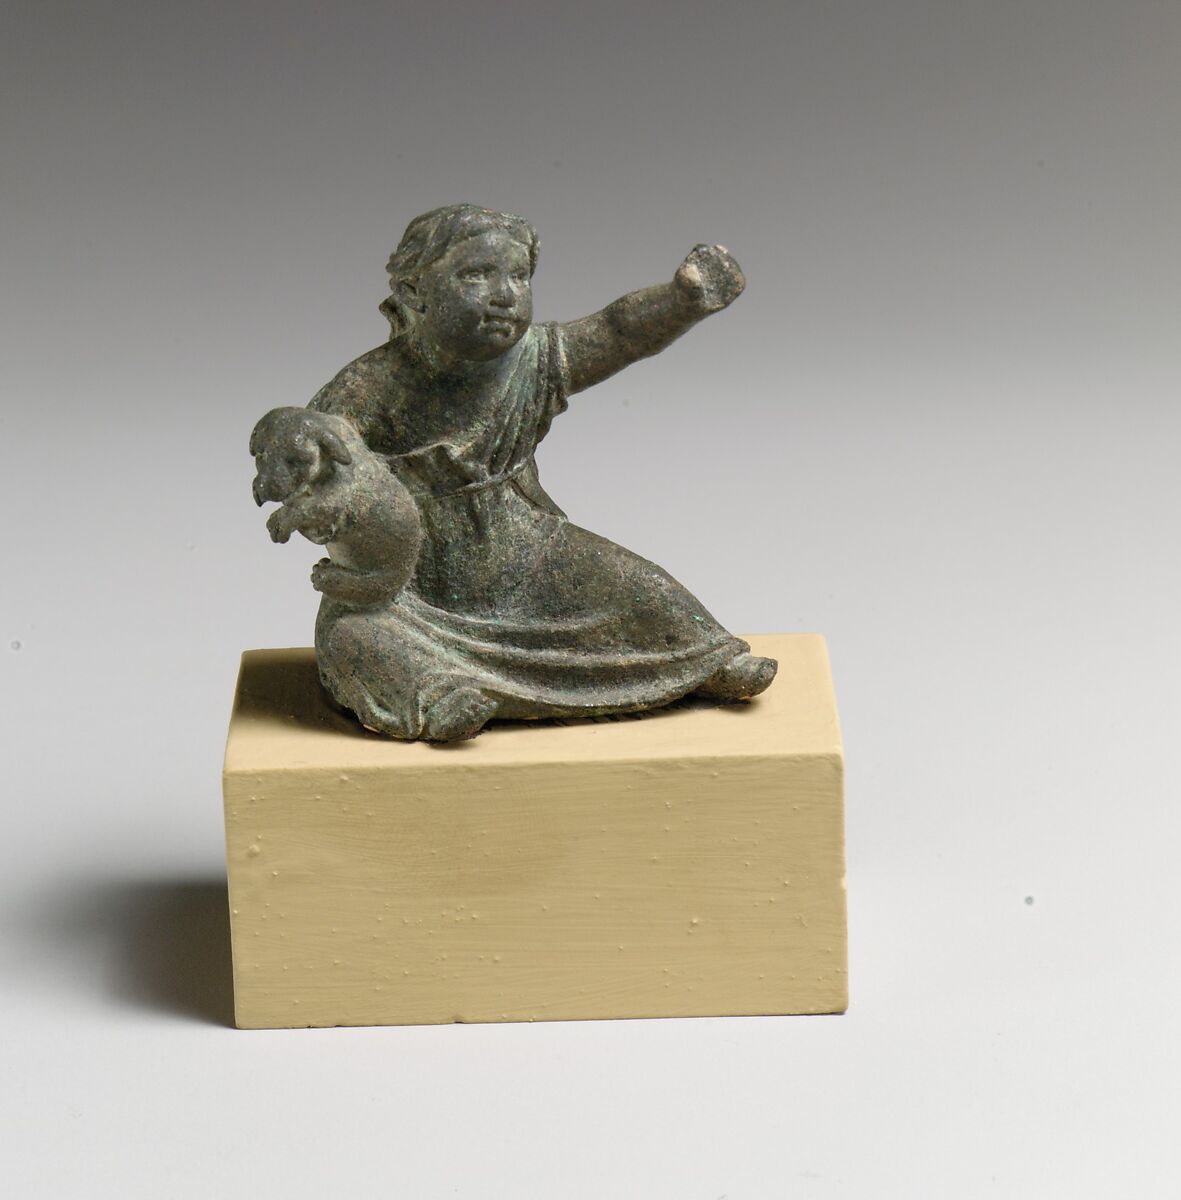 Bronze statuette of a girl holding a dog, Bronze, Greek or Roman 